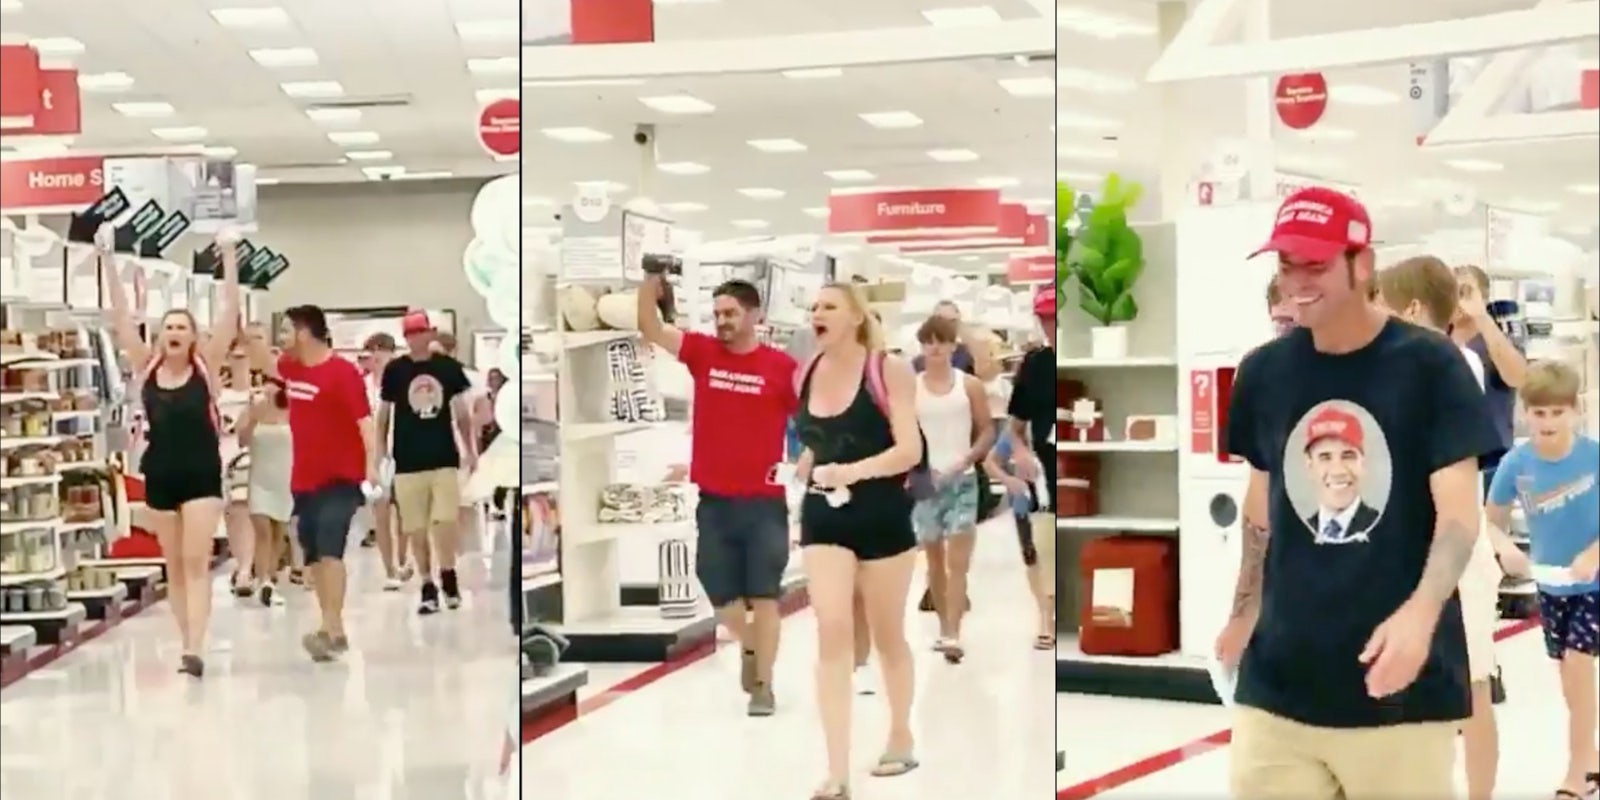 A video of about 7 protestors parading Target telling customers to take their masks off.